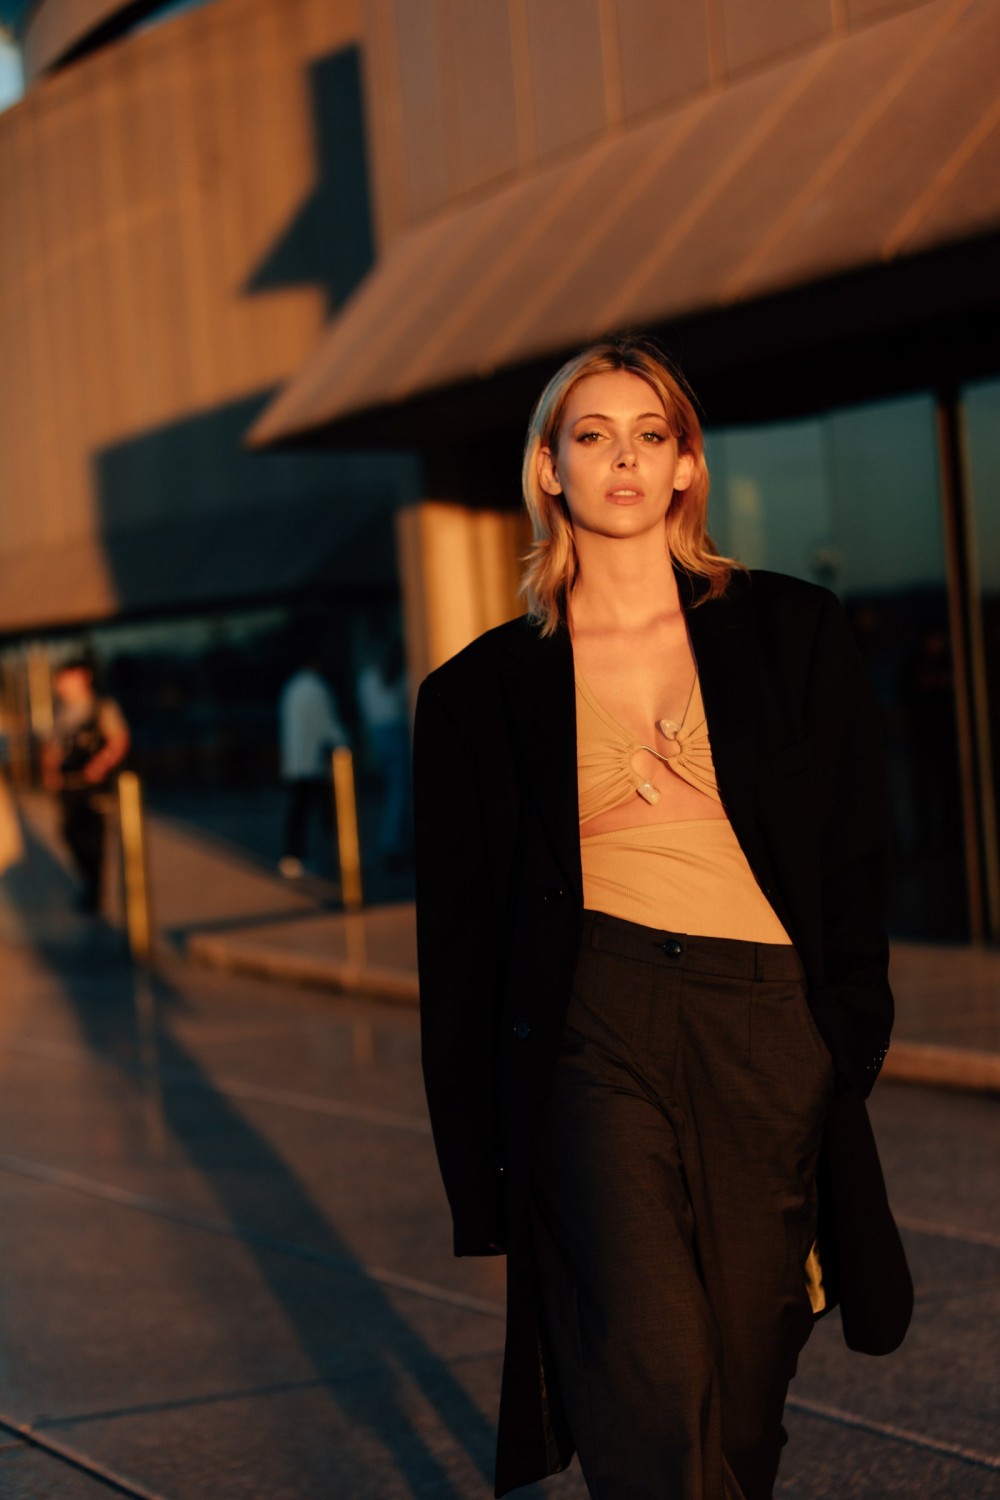 Image may contain Human Person Clothing Apparel Female Suit Coat Overcoat Fashion Valentina Zelyaeva and Woman